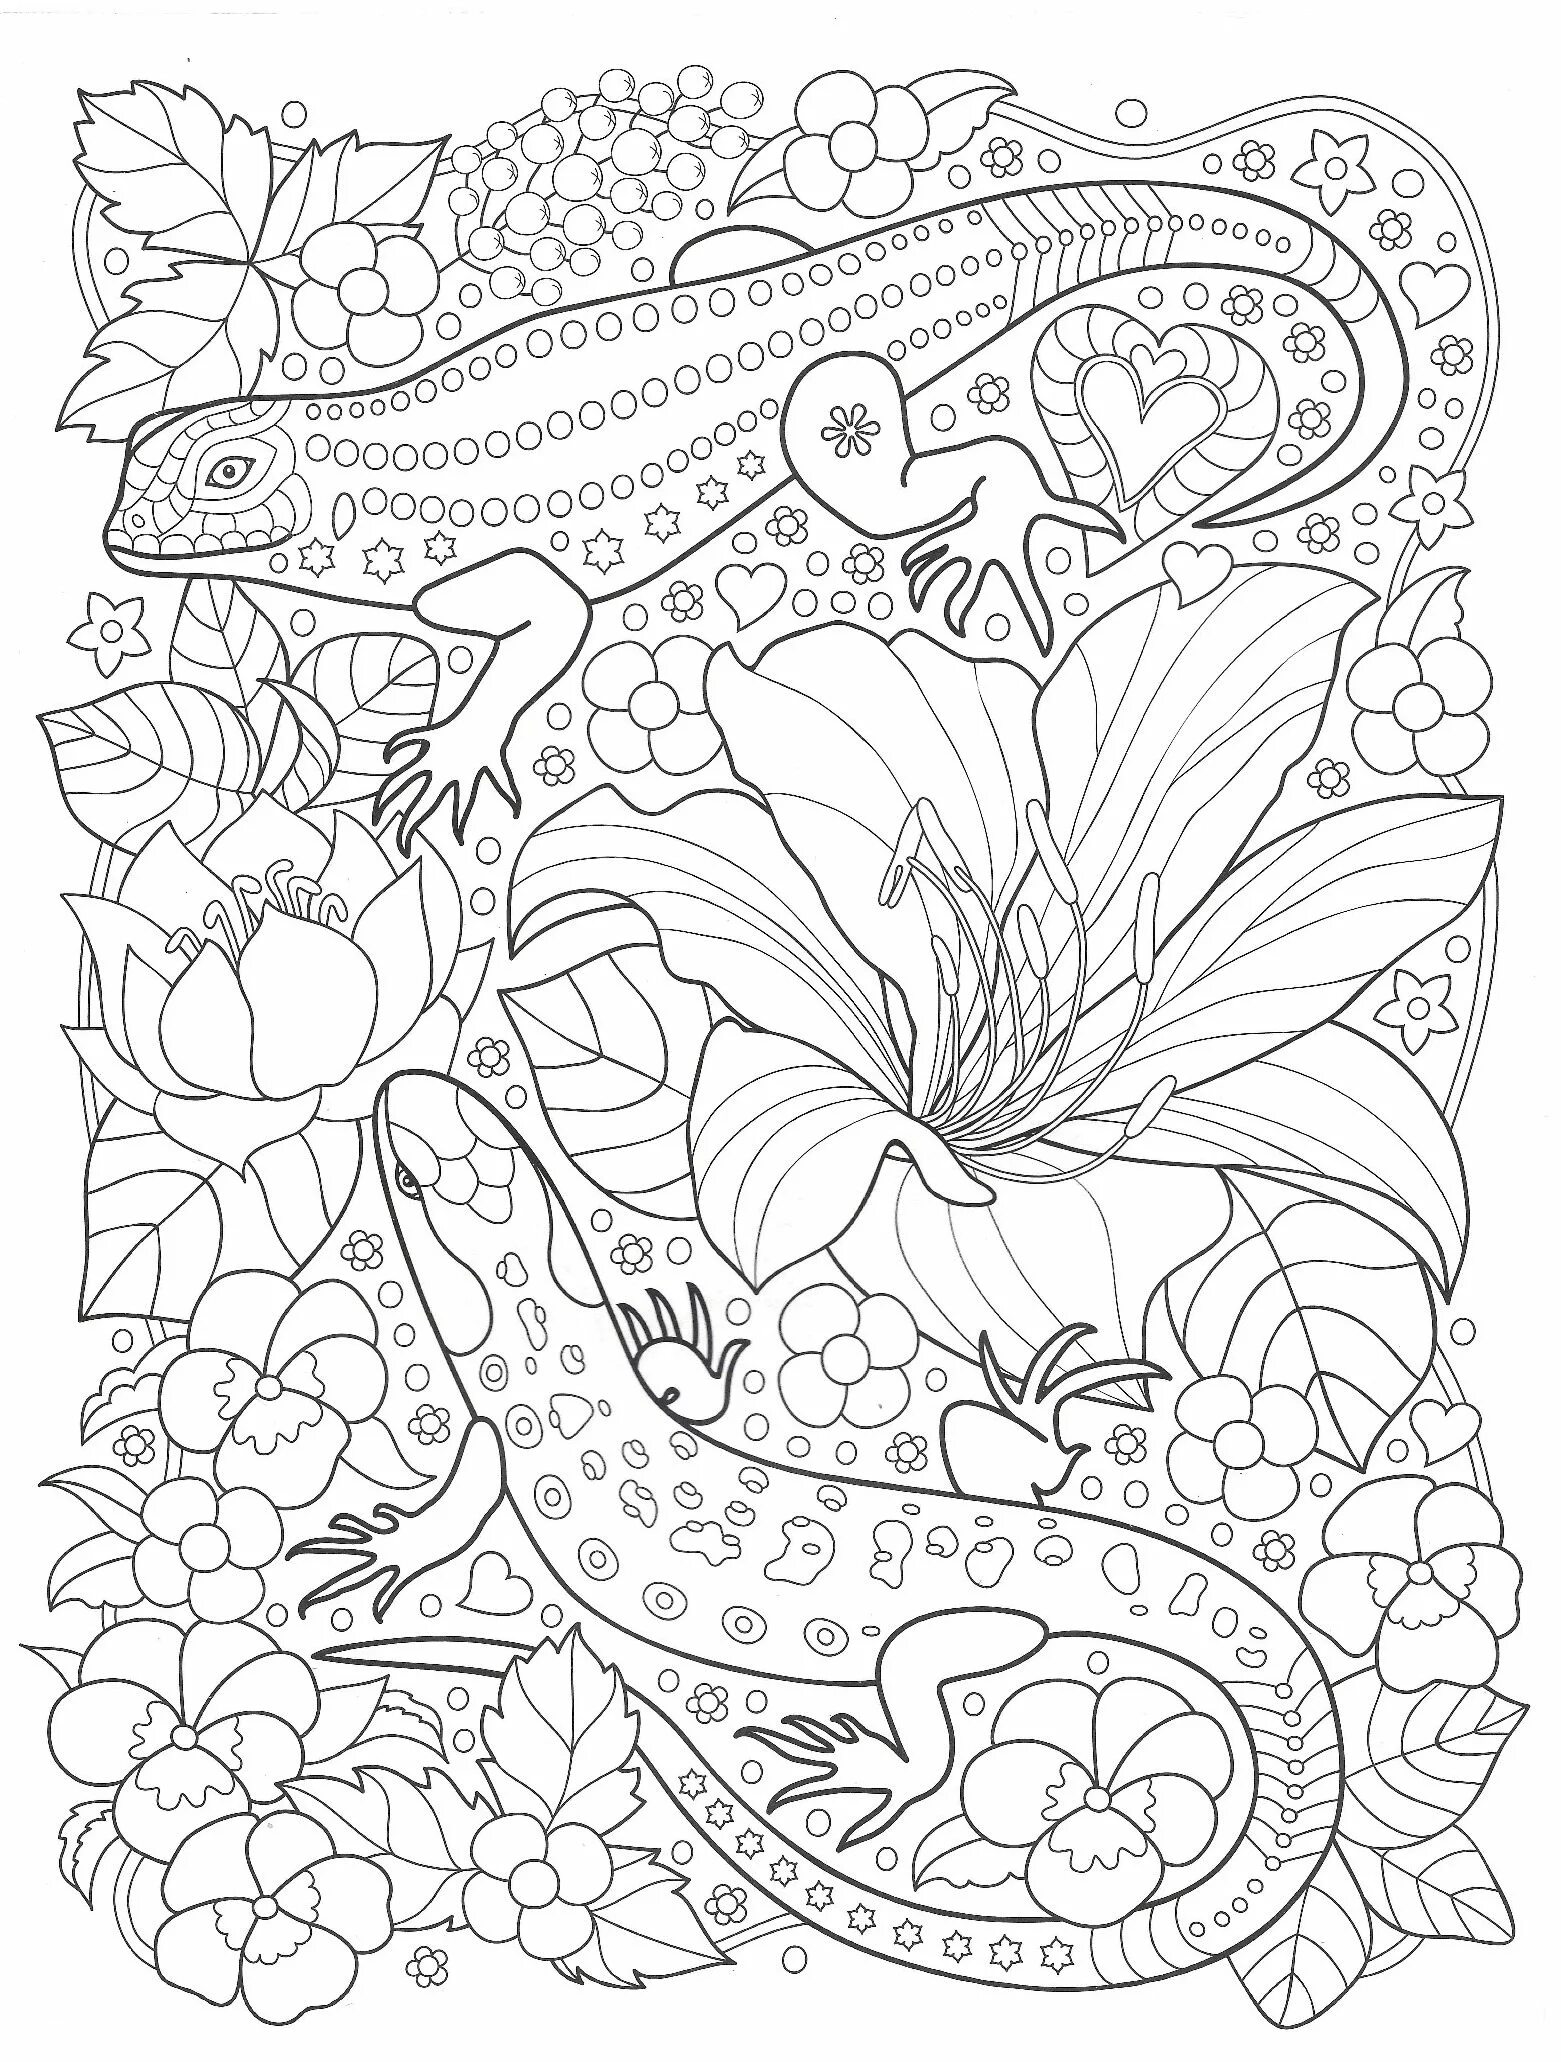 Energy coloring book relaxation antistress for adults